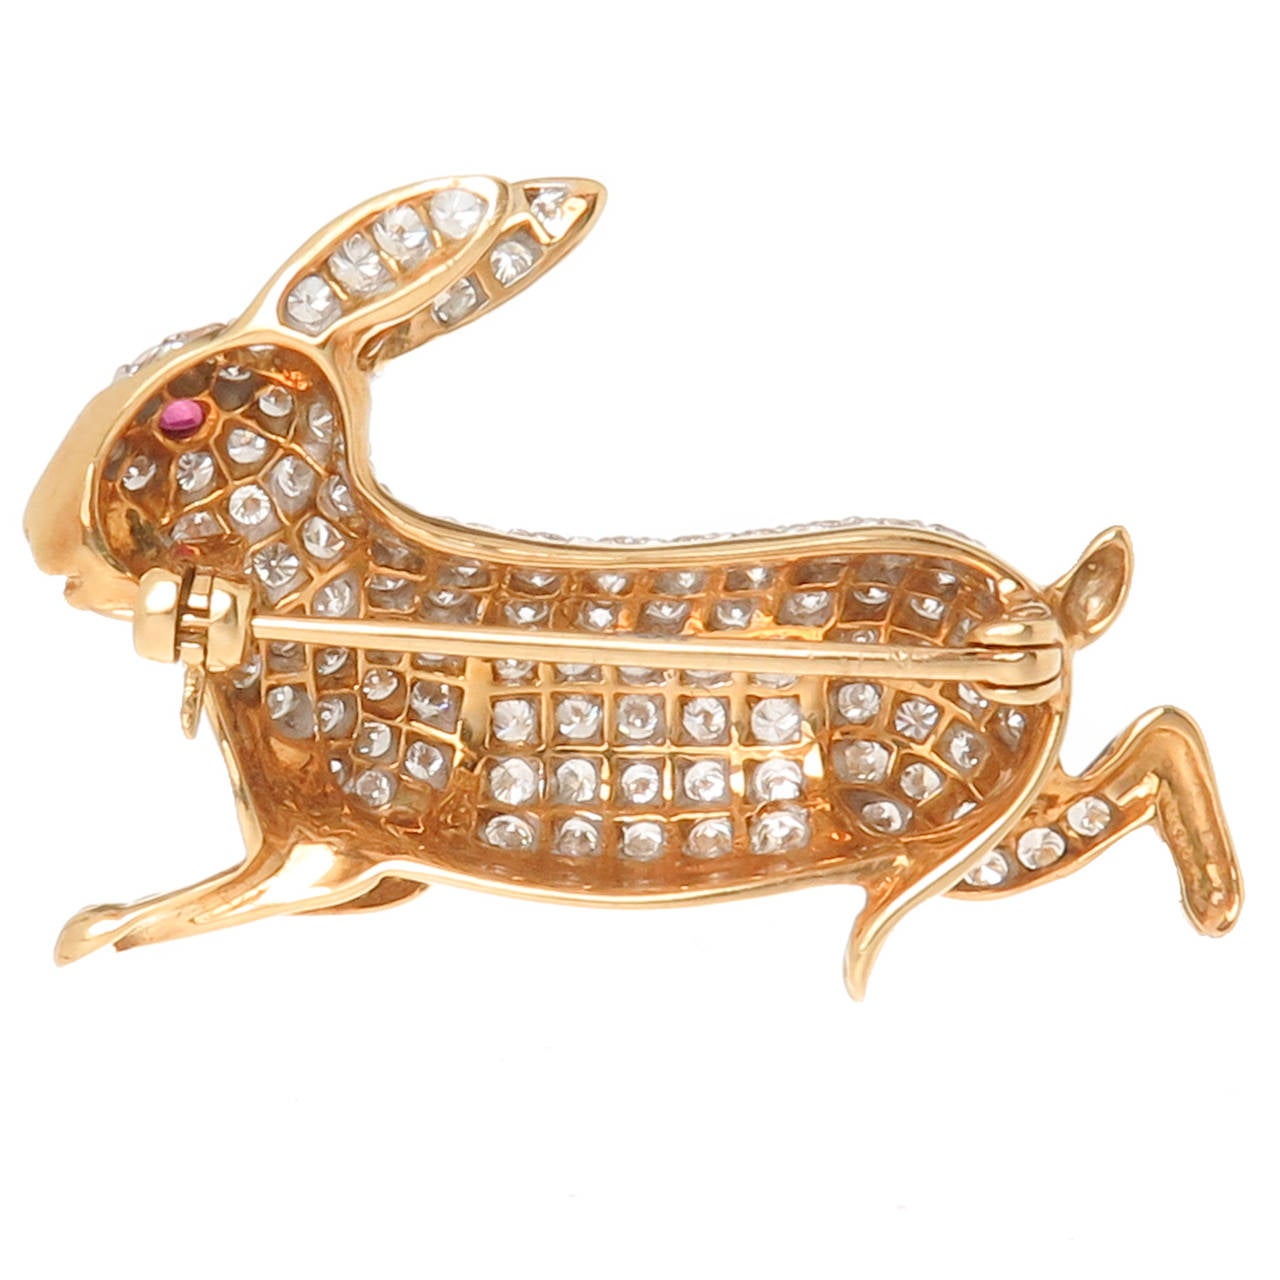 18K Yellow Gold Bunny Rabbit Brooch, set with Round Brilliant cut Diamonds totaling 2.50 Carats.Further accented with a Ruby Eye. Very Well made and nicely Detailed. Measuring 1 3/8 inch in length.